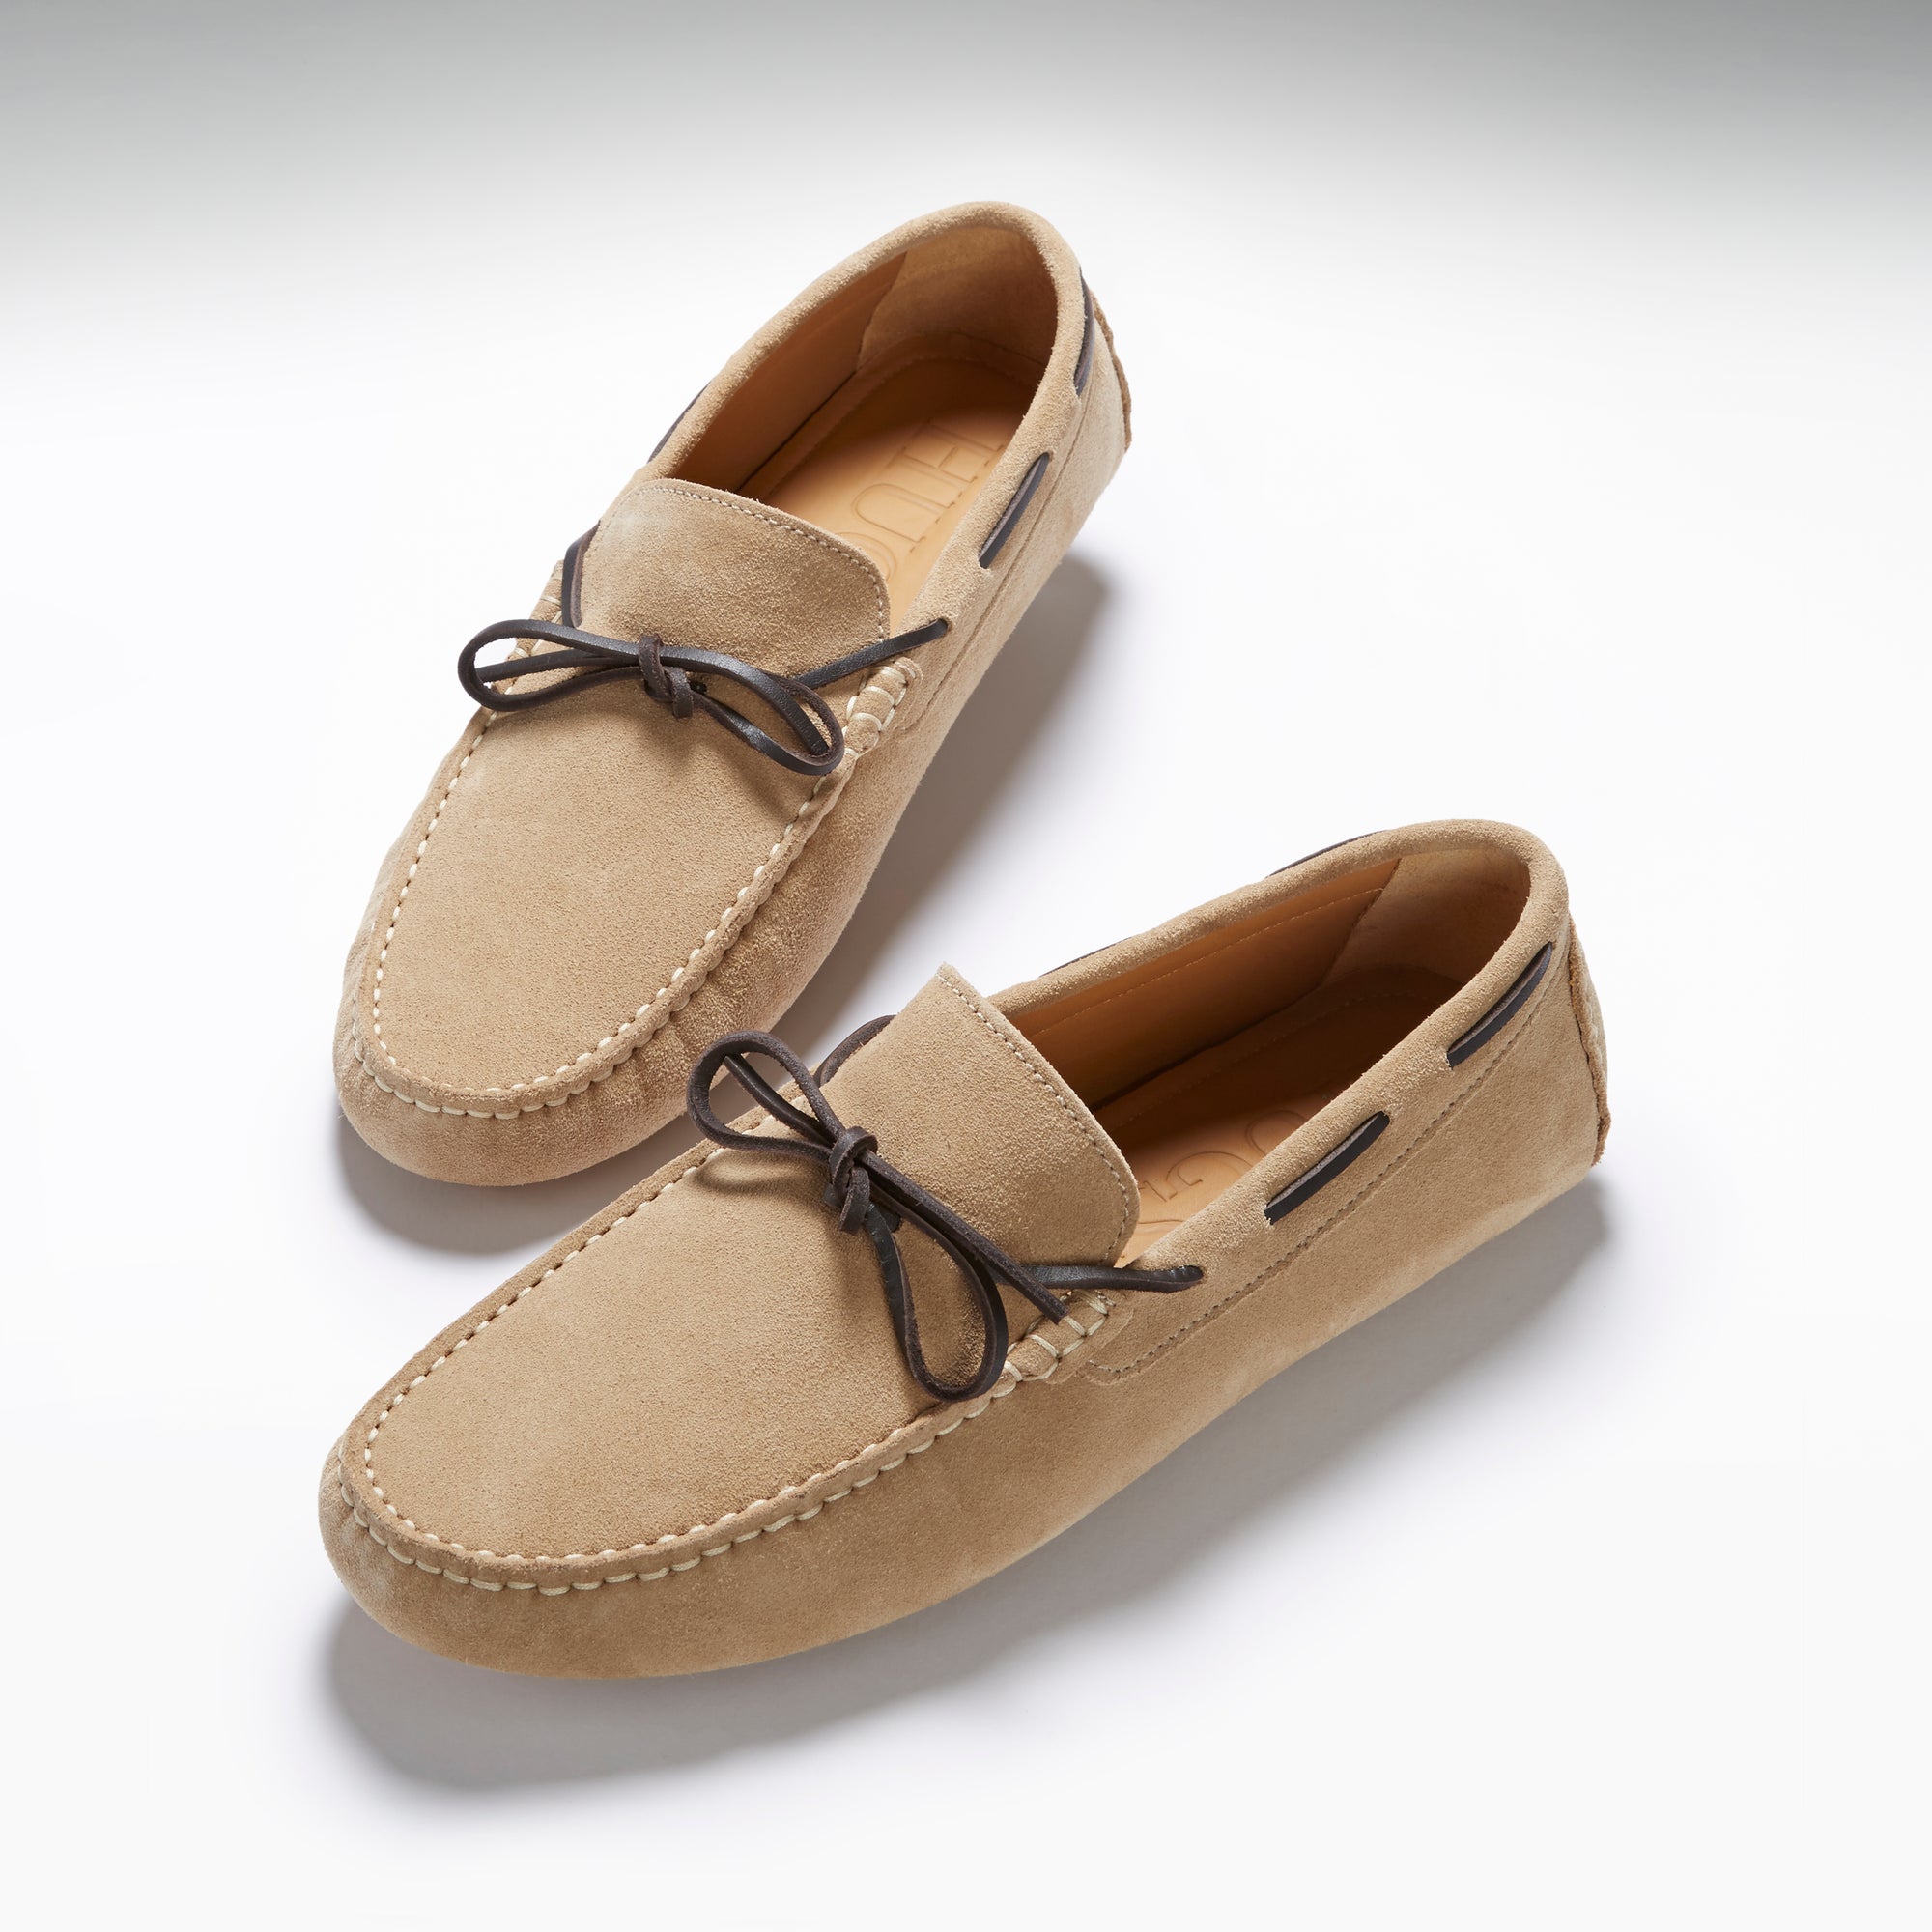 Laced Driving Loafers, taupe suede